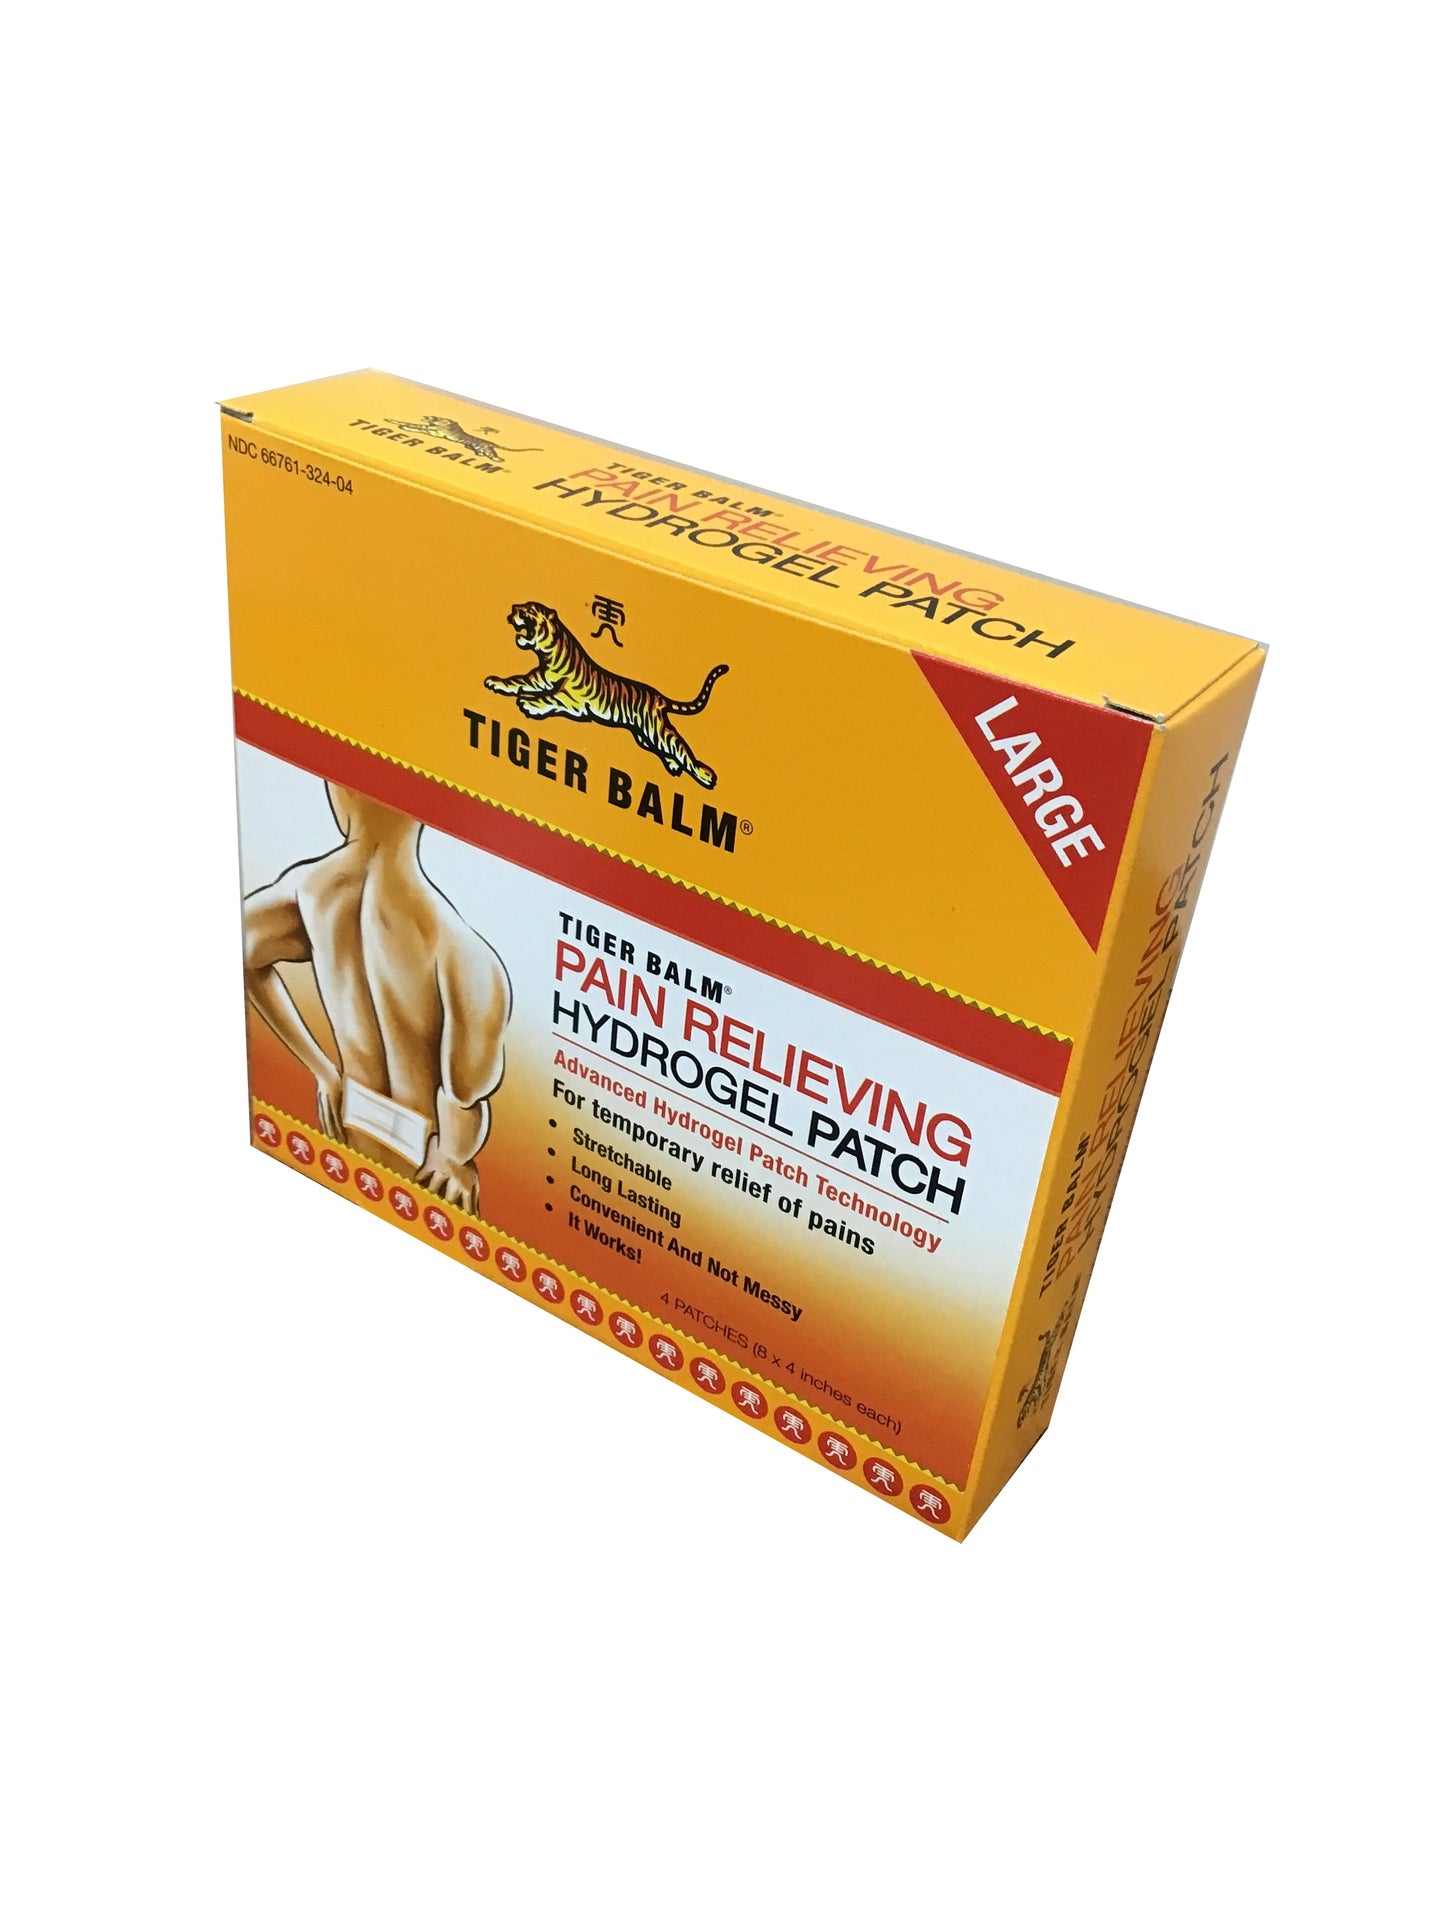 Tiger Balm Pain Relieving Hydrogel Patch 虎标止痛贴